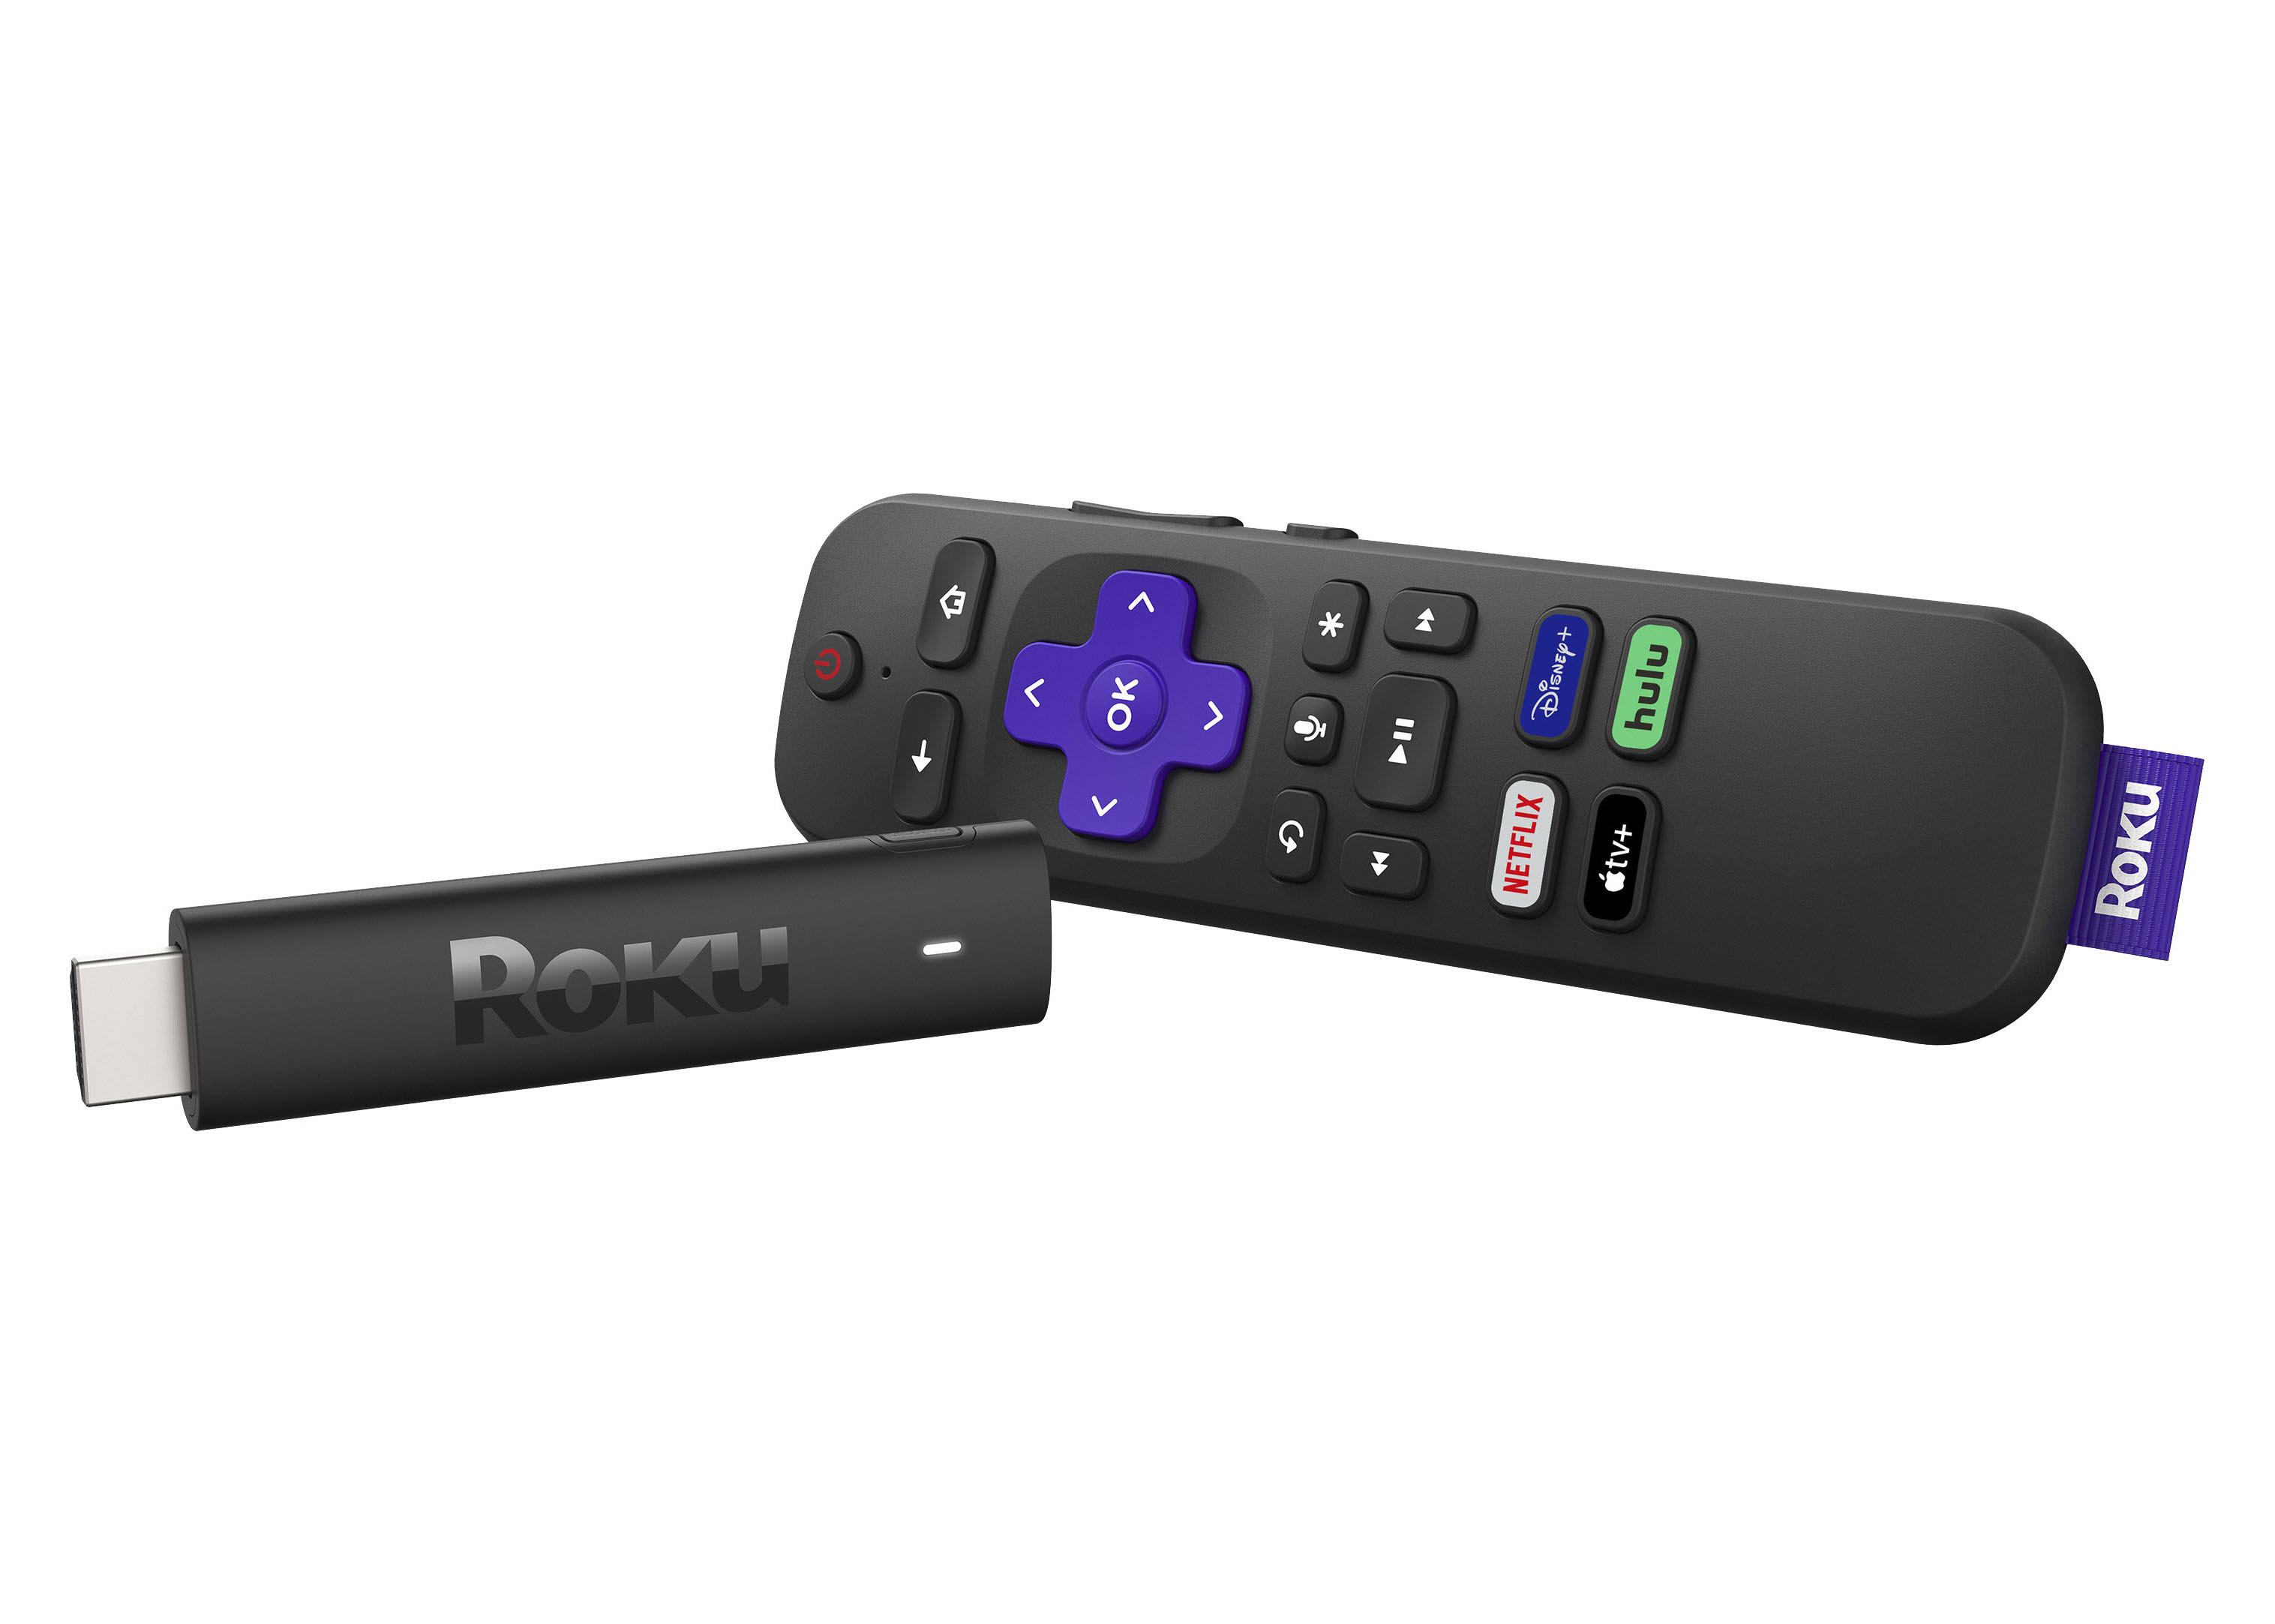 ROKU Streaming Stick 4K 2021 | Streaming Device 4K/HDR/Dolby Vision with Voice Remote and TV Controls